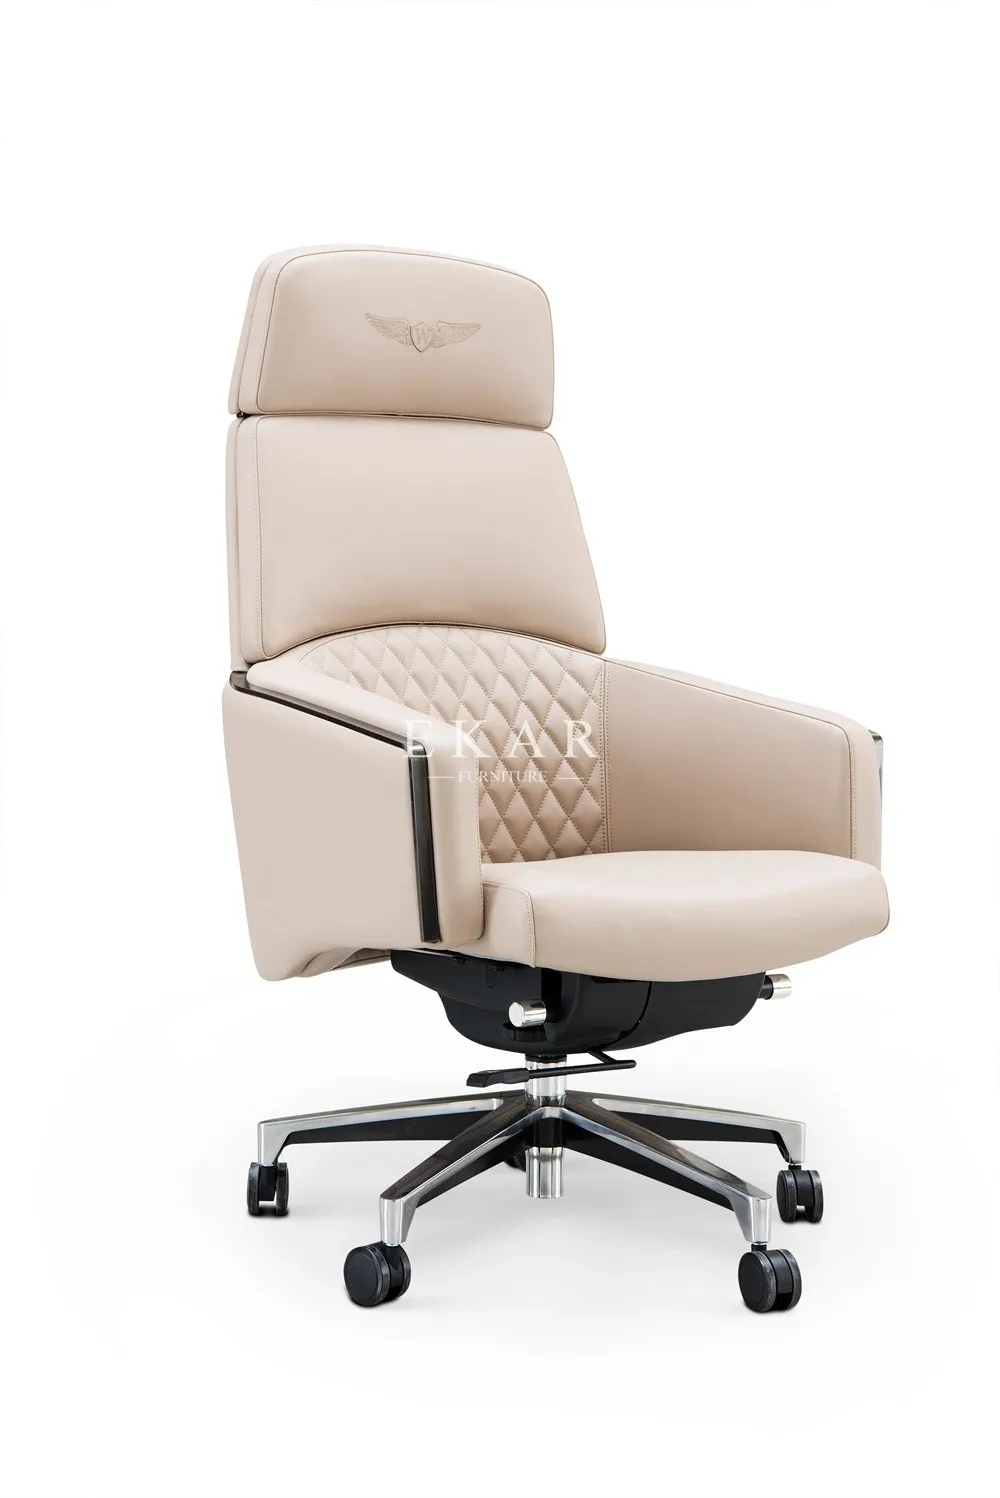 Modern Design Leather Executive Office Chair With Wheels - Buy Office